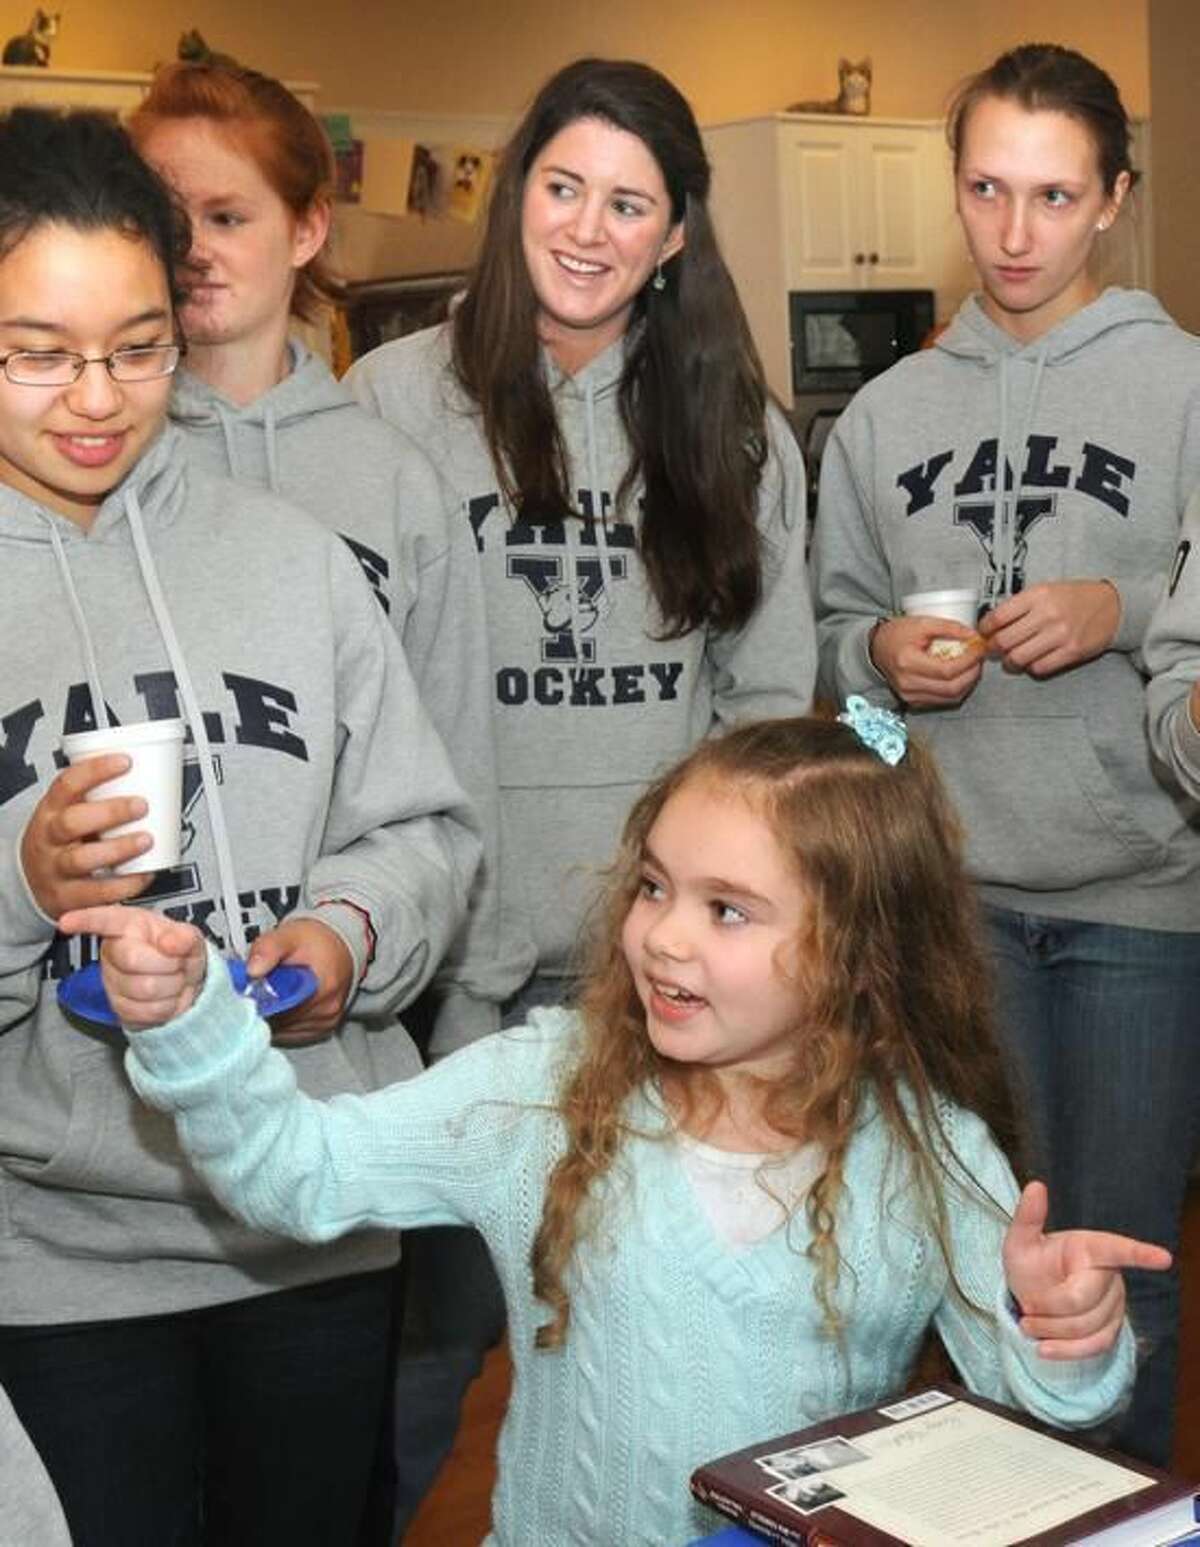 The Yale women's hockey team, including Aleca Hughes (center), "adopted" nine-year-old Giana Cardonita of Guilford, who had a benign brain tumor removed. On Thursday, Hughes was honored as the ECAC Hockey Mandi Schwartz Student-Athlete of the Year. (Mara Lavitt/Register file photo)